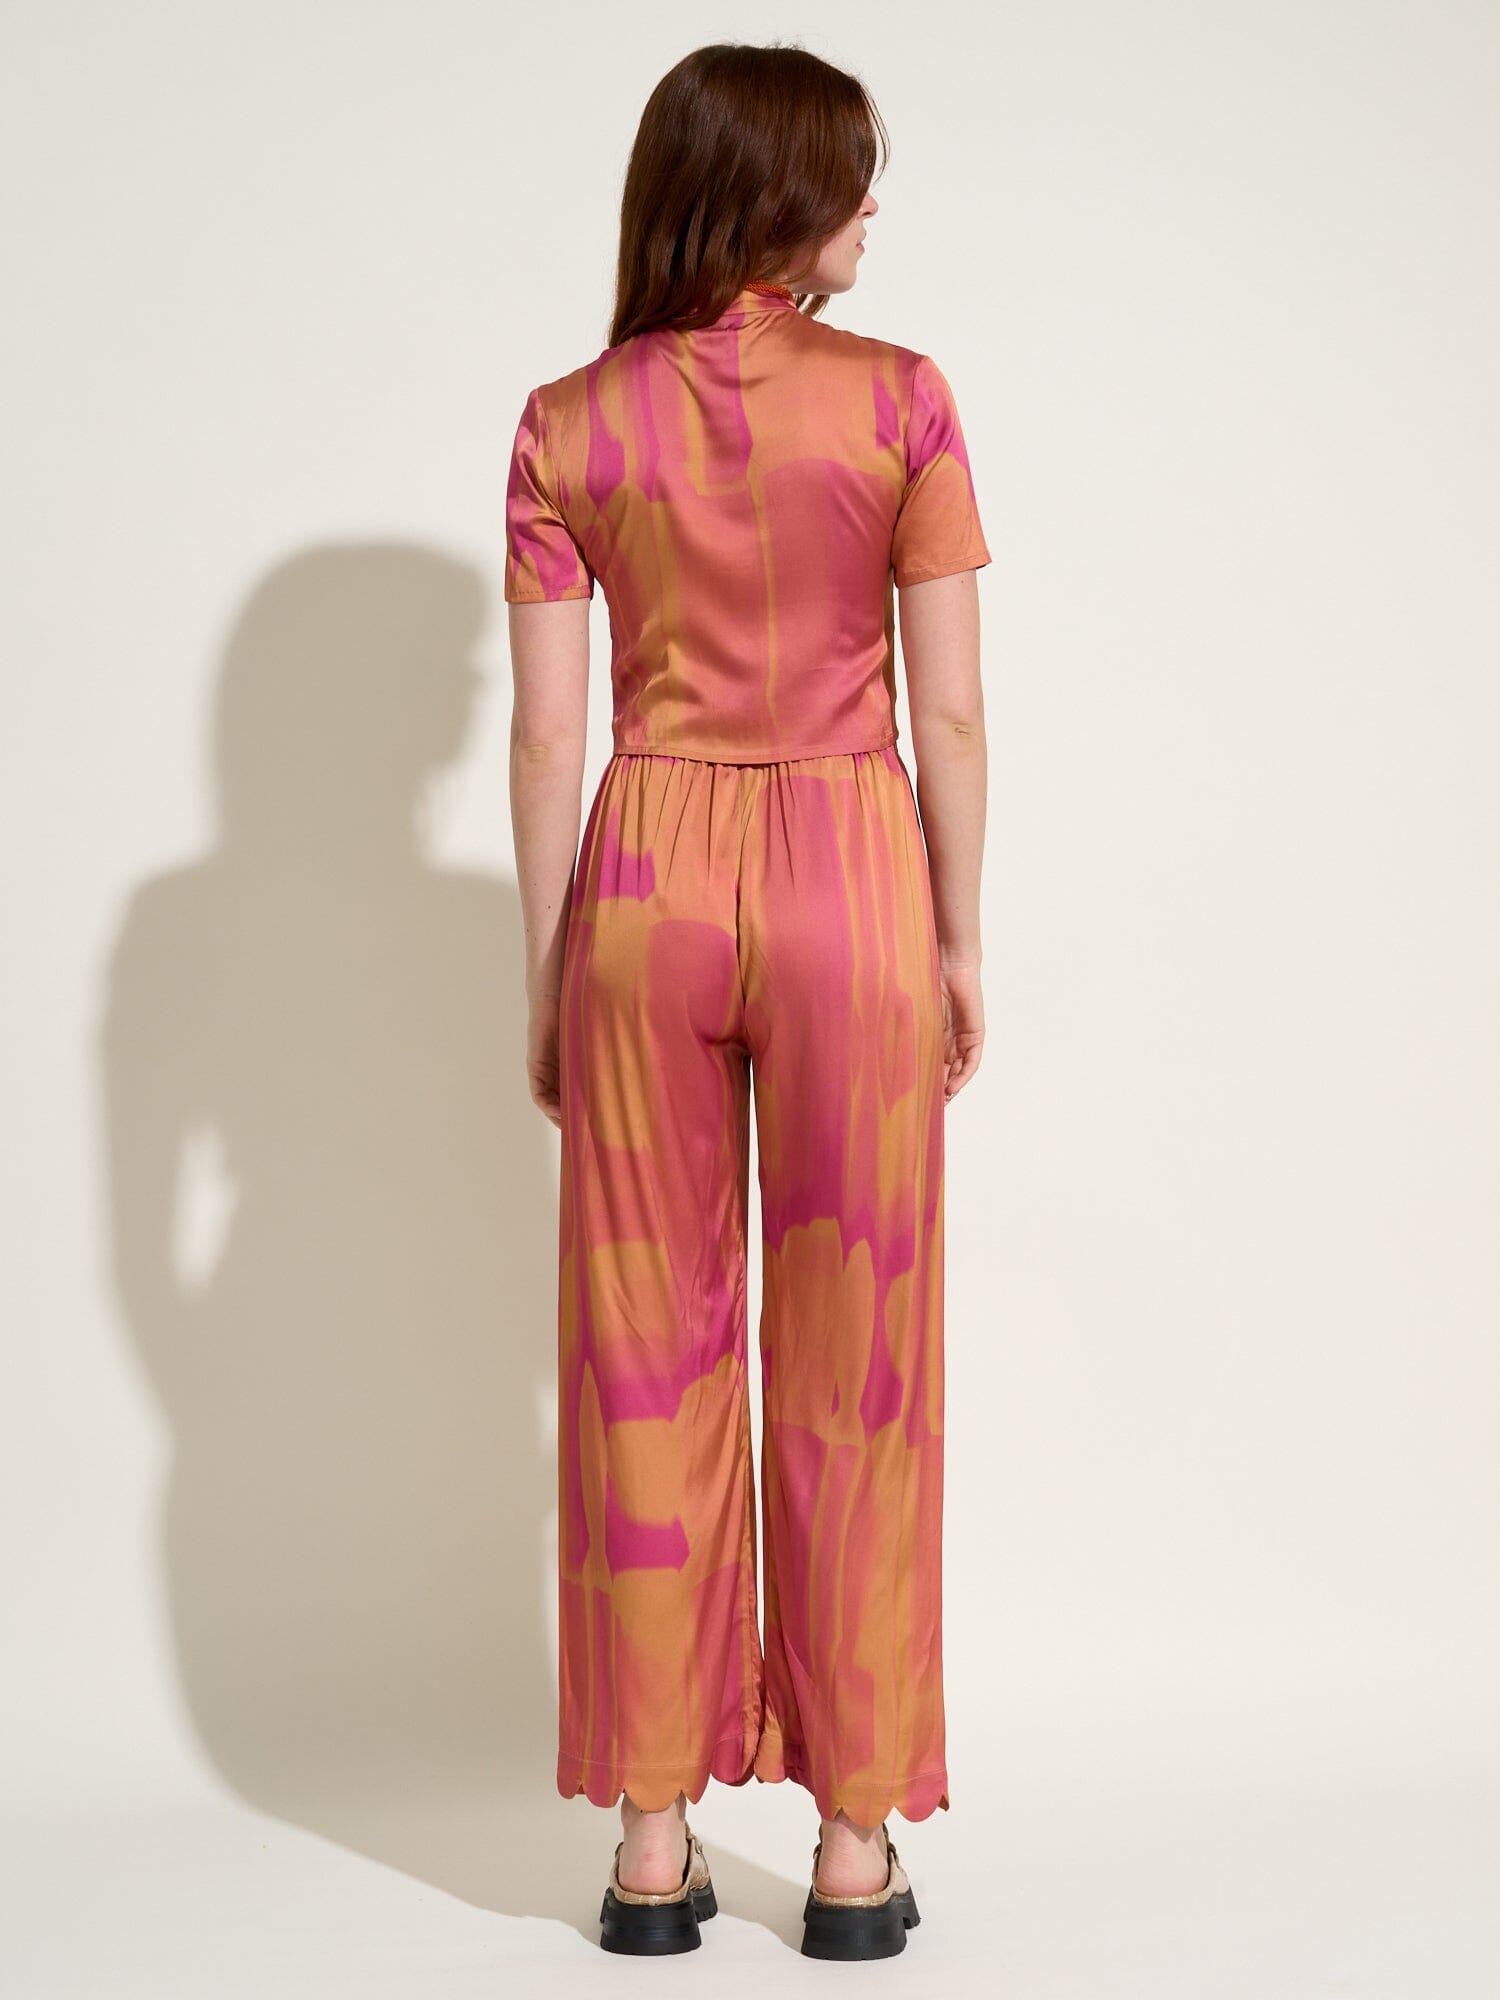 SIFNOS - Tie & Dye Fuchsia Printed Viscose Satin Wide Leg Pants with Elasticated Bottom and Petal Detail Pants Fête Impériale